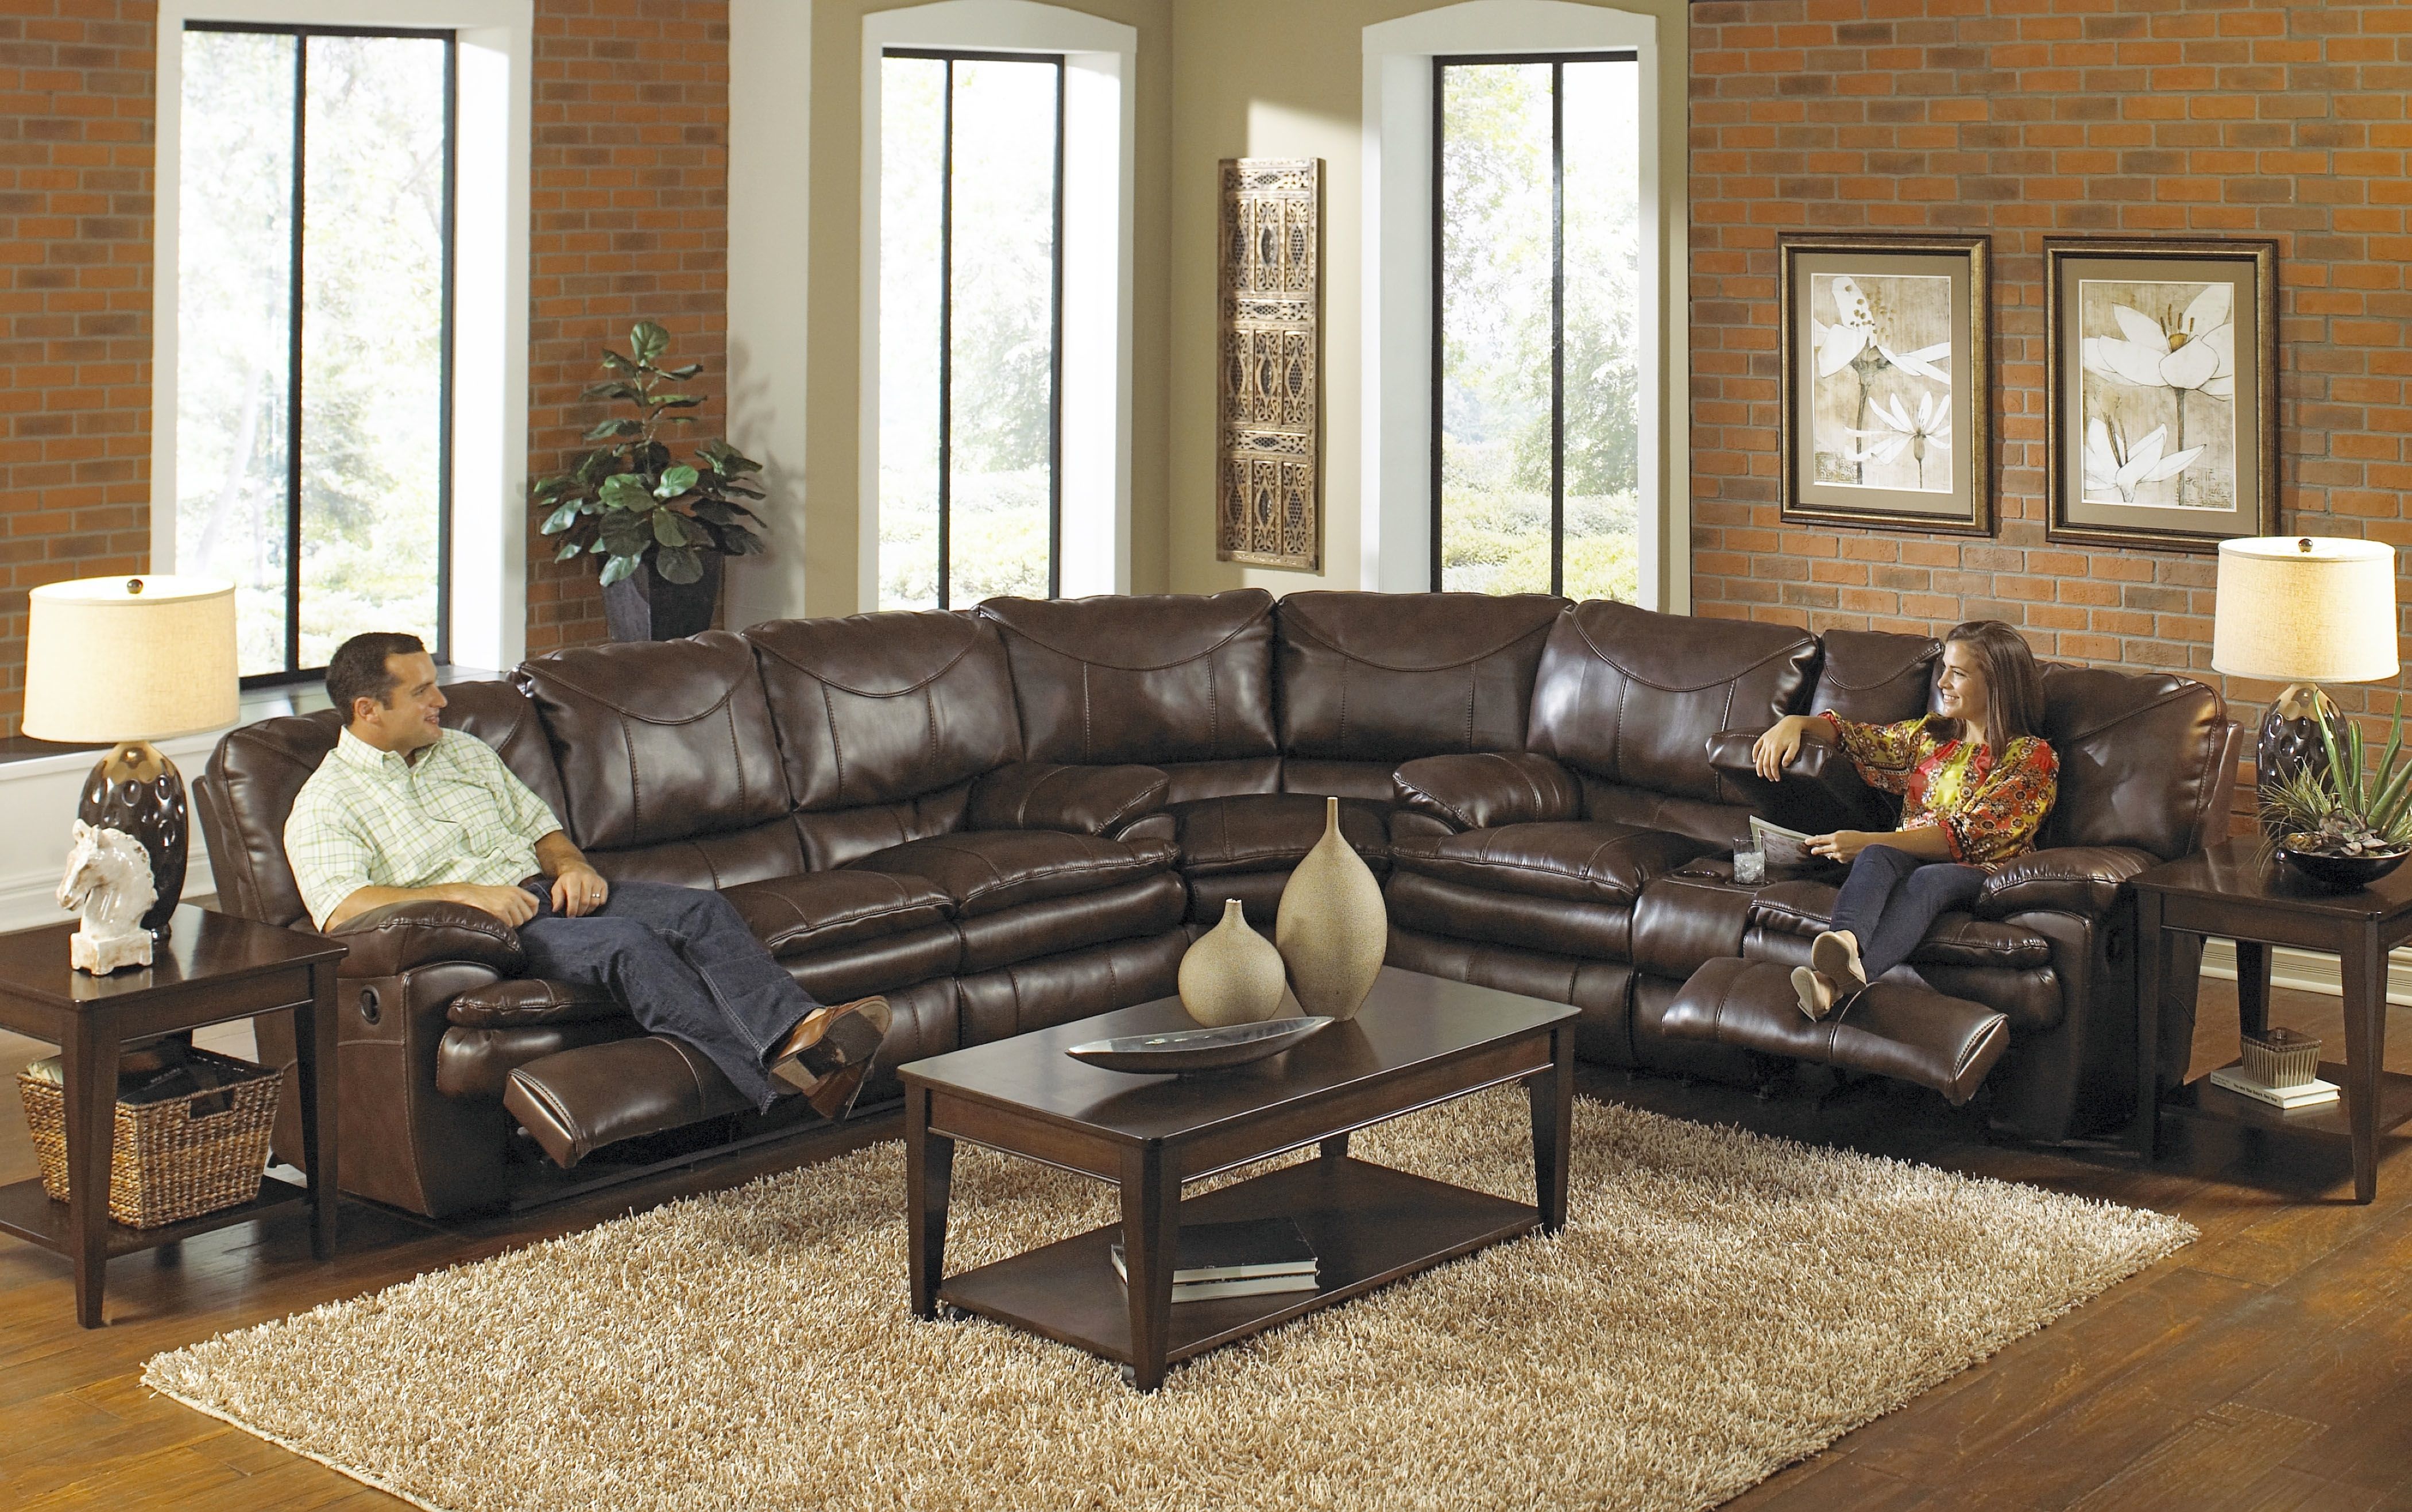 High Quality Leather Sectional Sofas – Radiovannes With Regard To High End Leather Sectional Sofas (View 2 of 10)